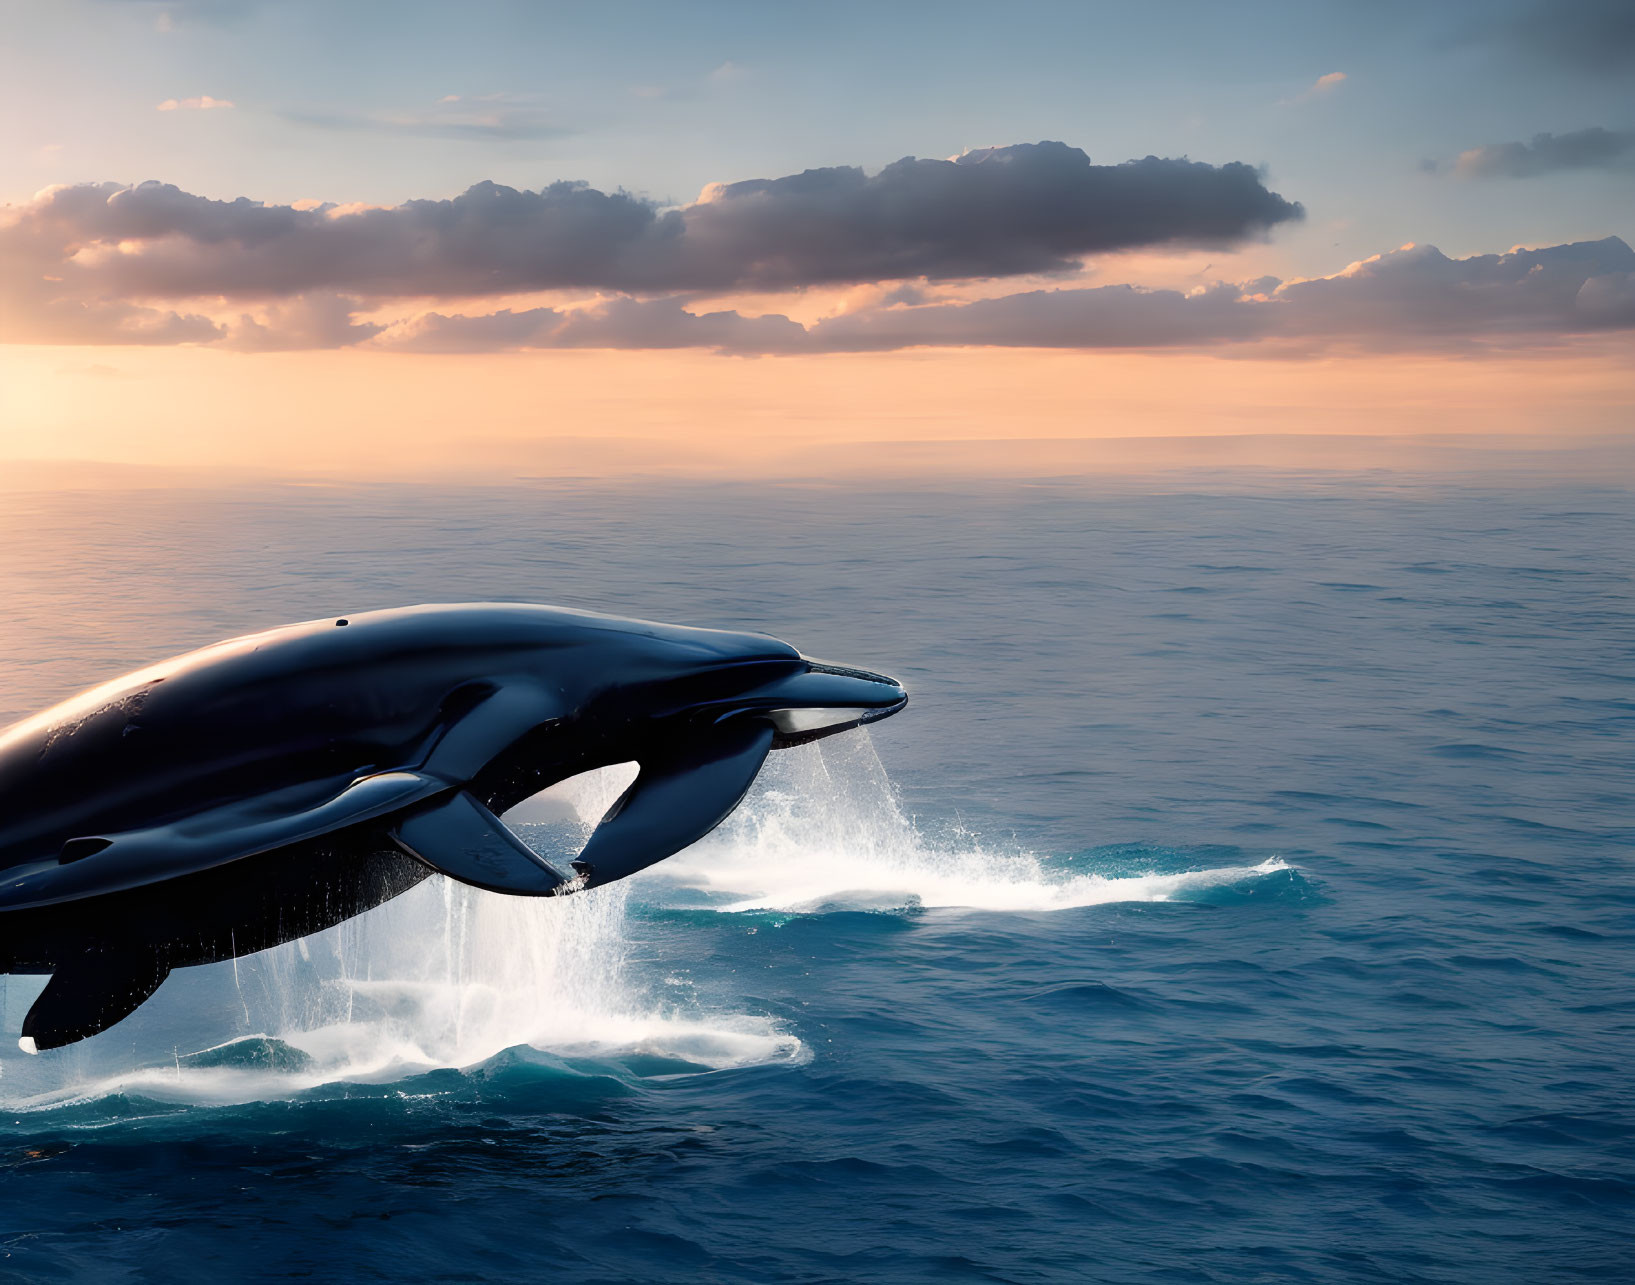 Orca whale leaping in sunset sky with frozen water droplets